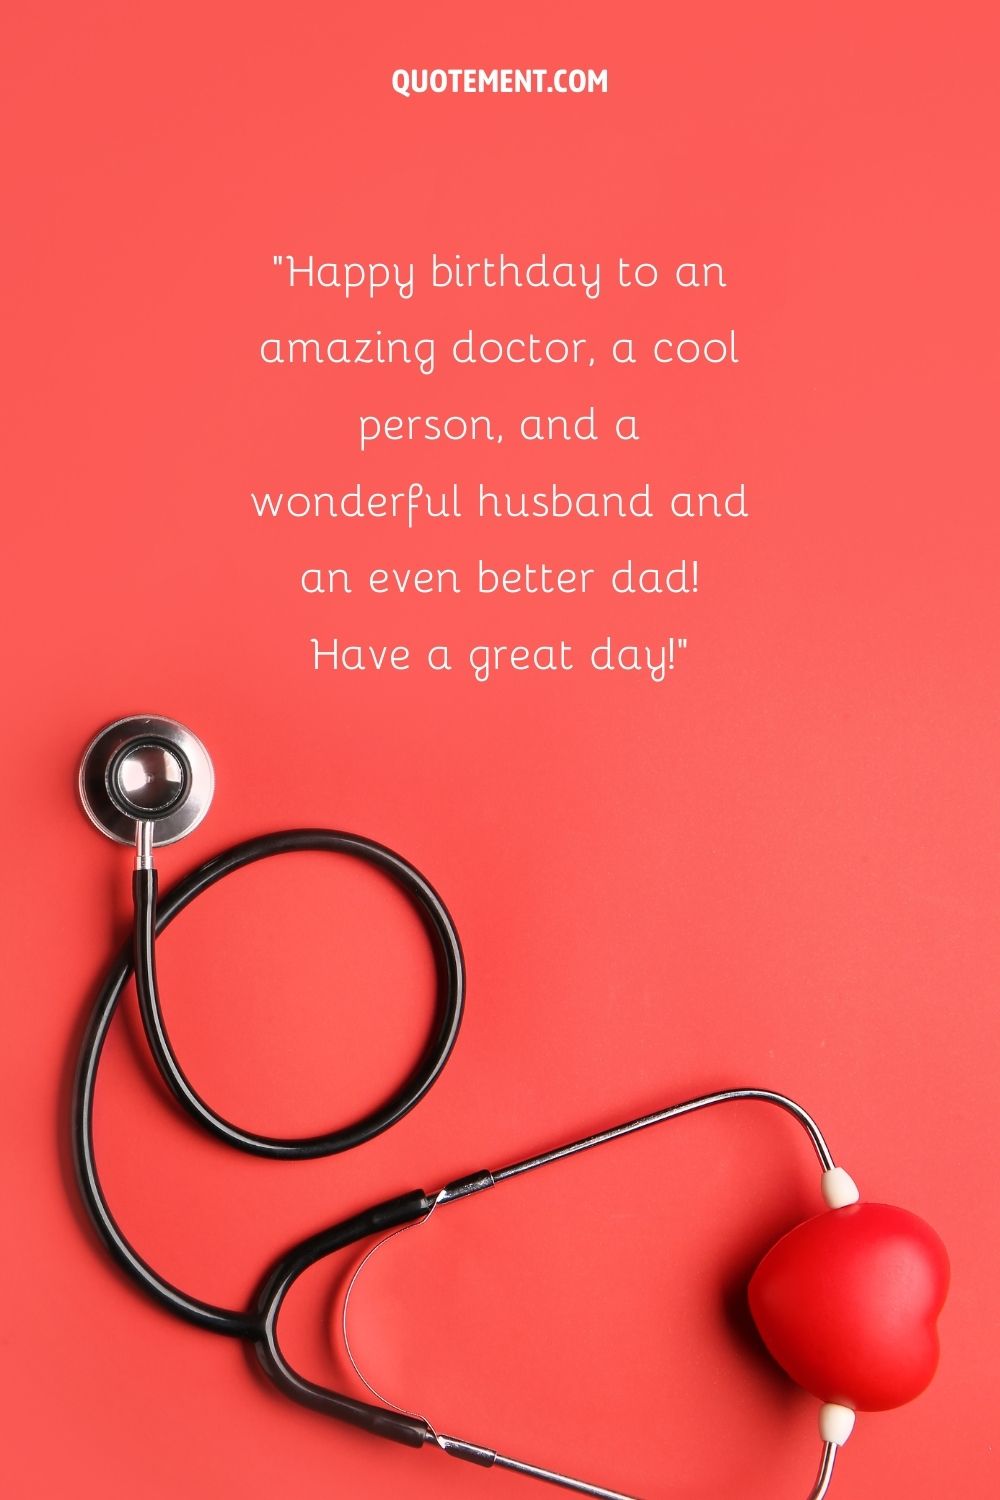 best happy birthday husband wish represented by doctor birthday wishes quote